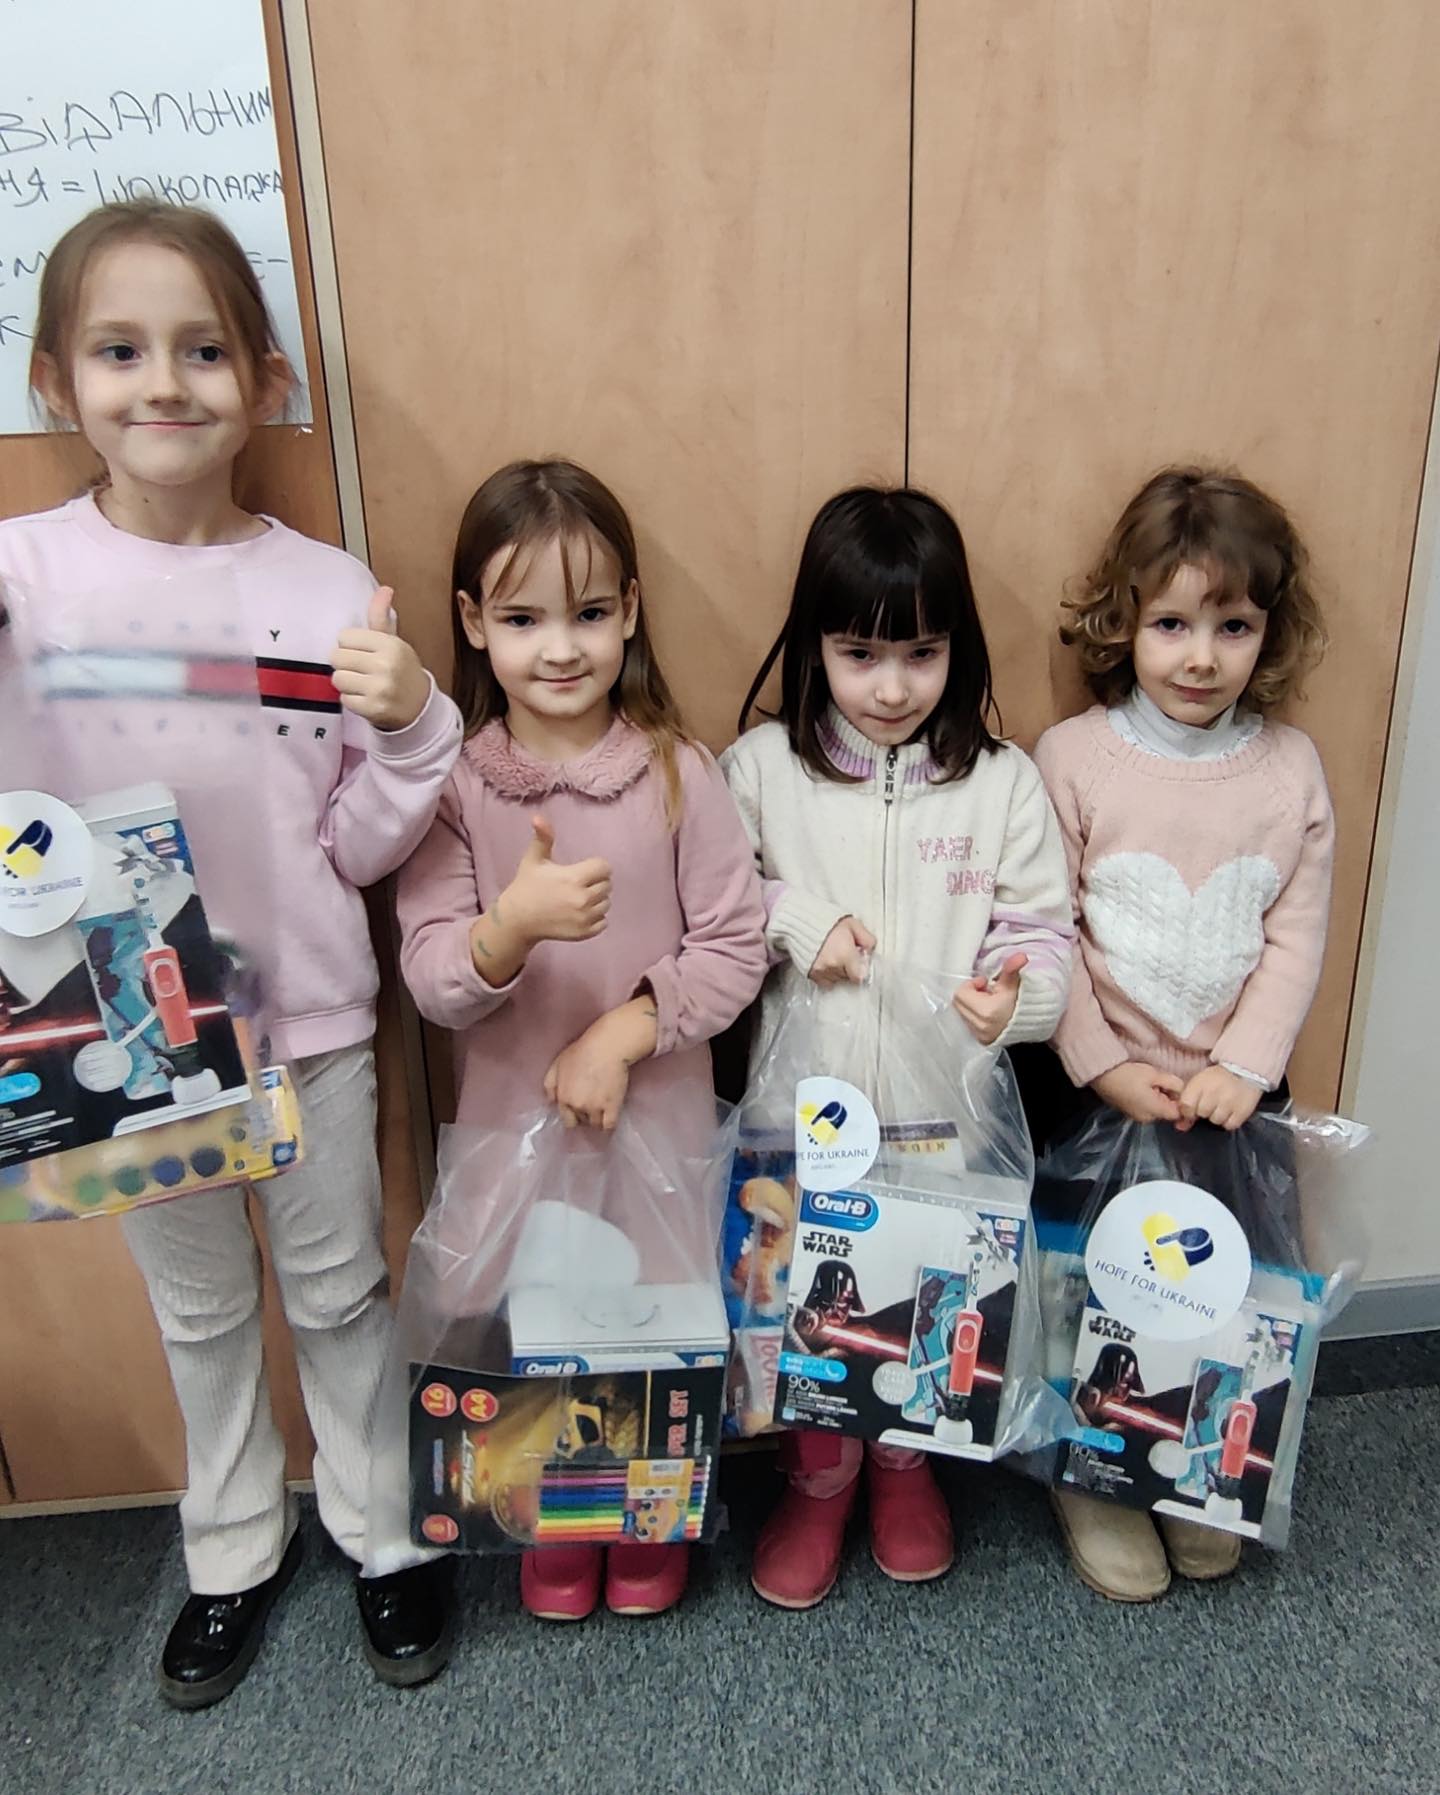 A group of young girls holding bags of toys.